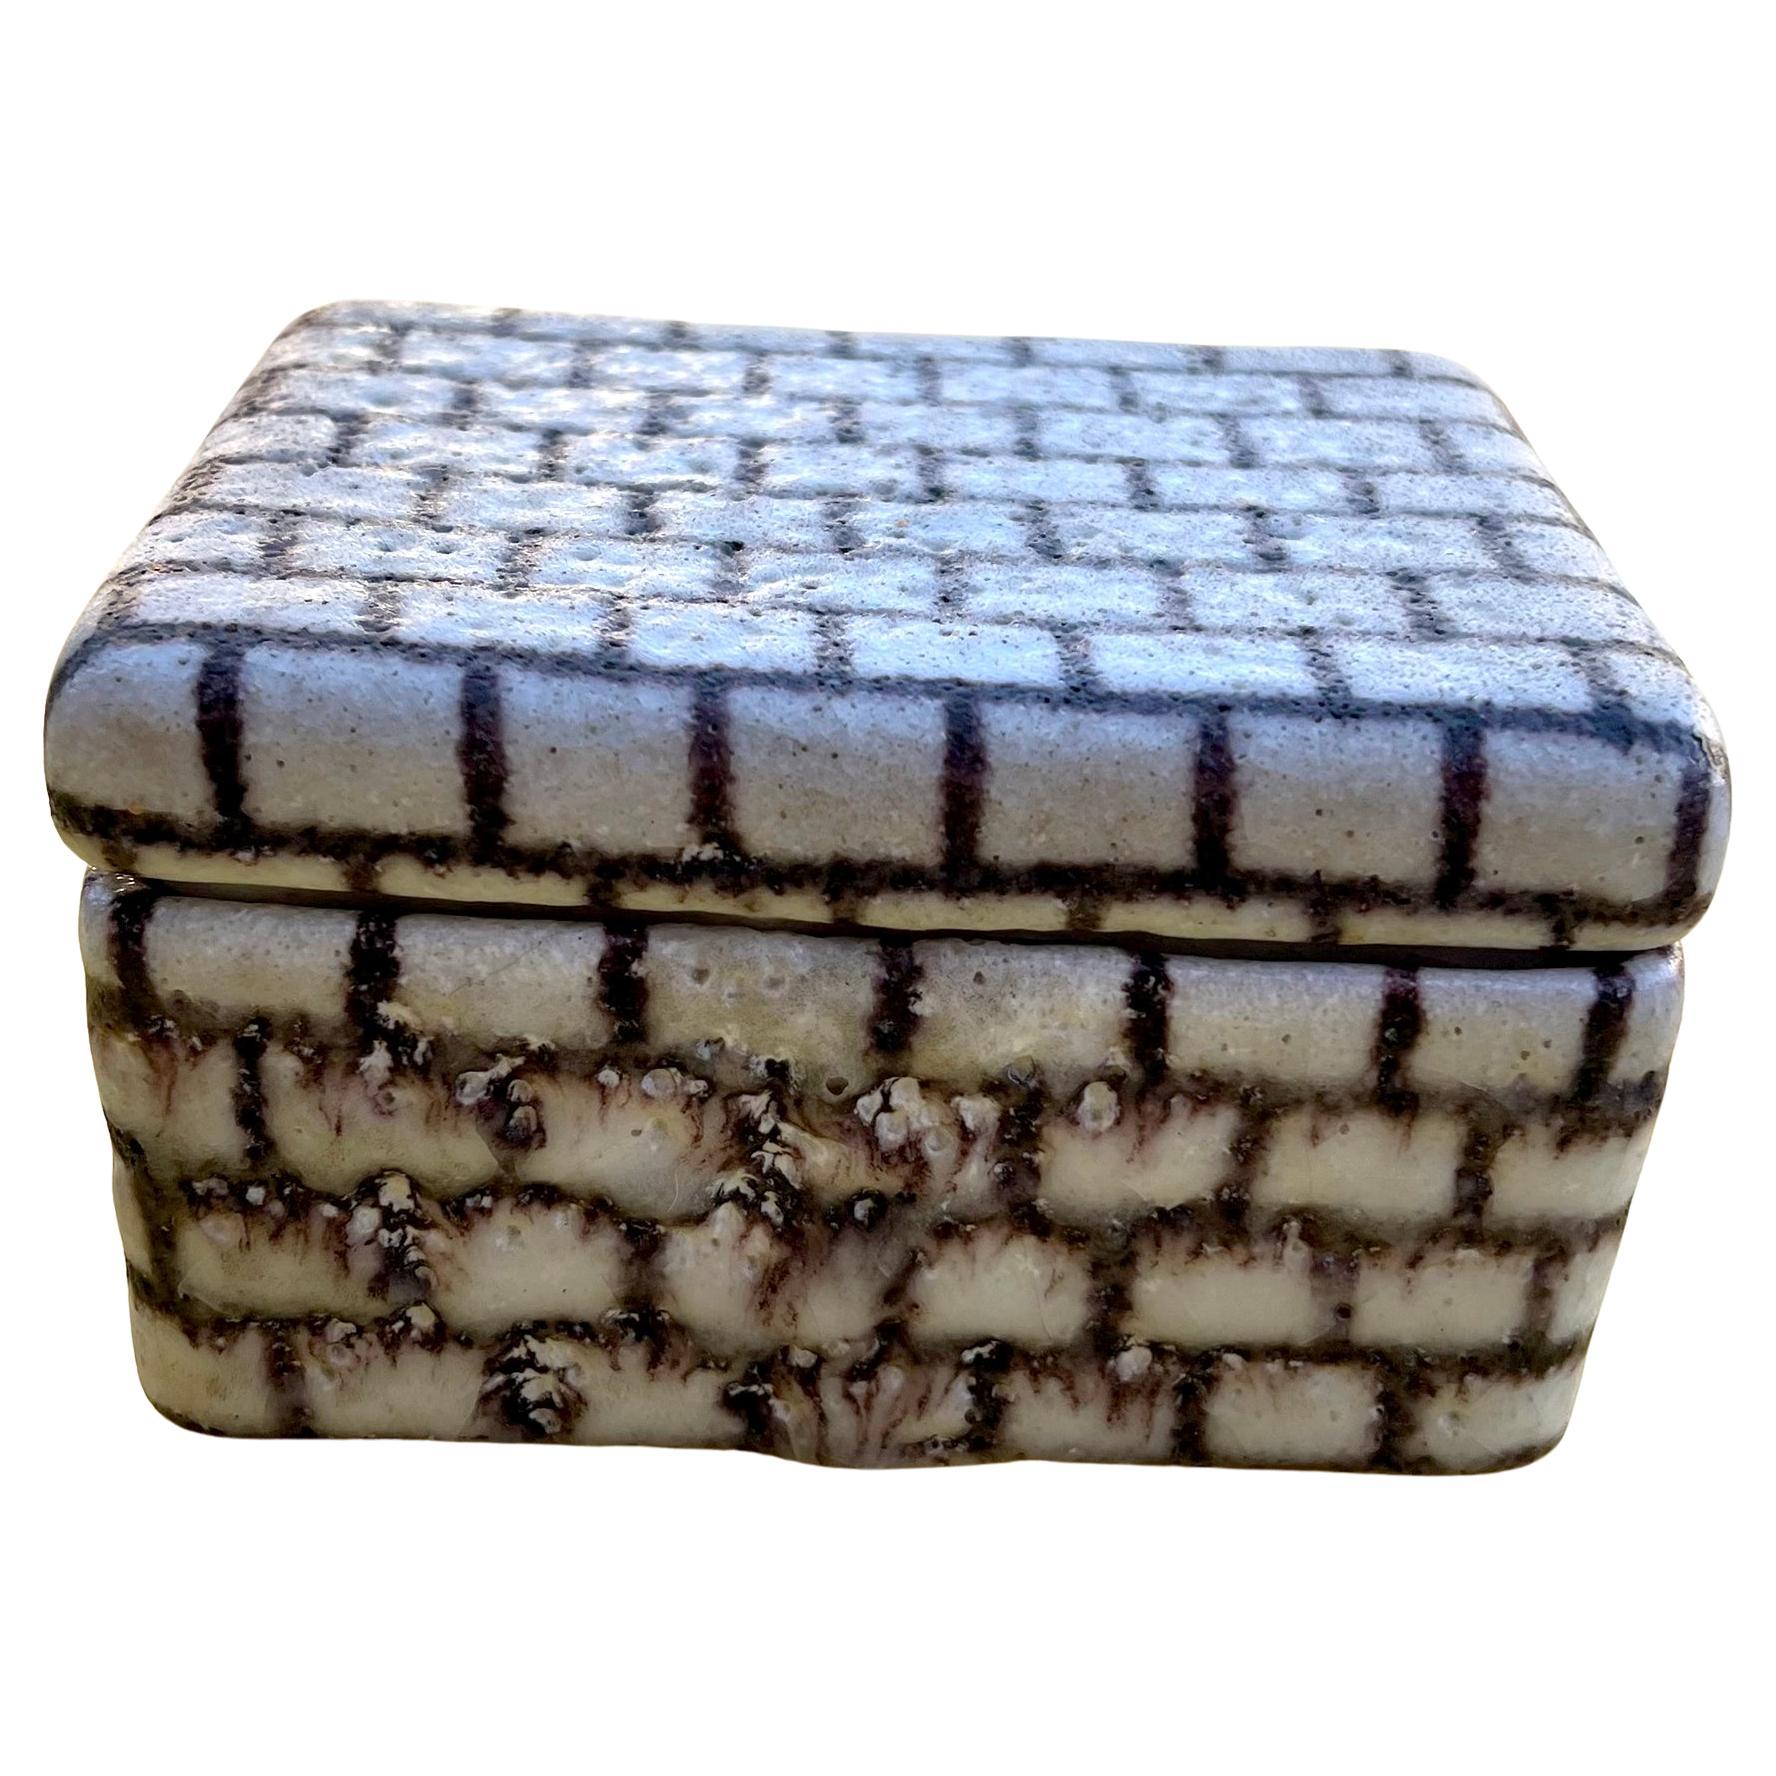 Guido Gambone Italian Modernist Foamy Glazed Ceramic Box with Grid Decoration In Good Condition For Sale In Palm Springs, CA